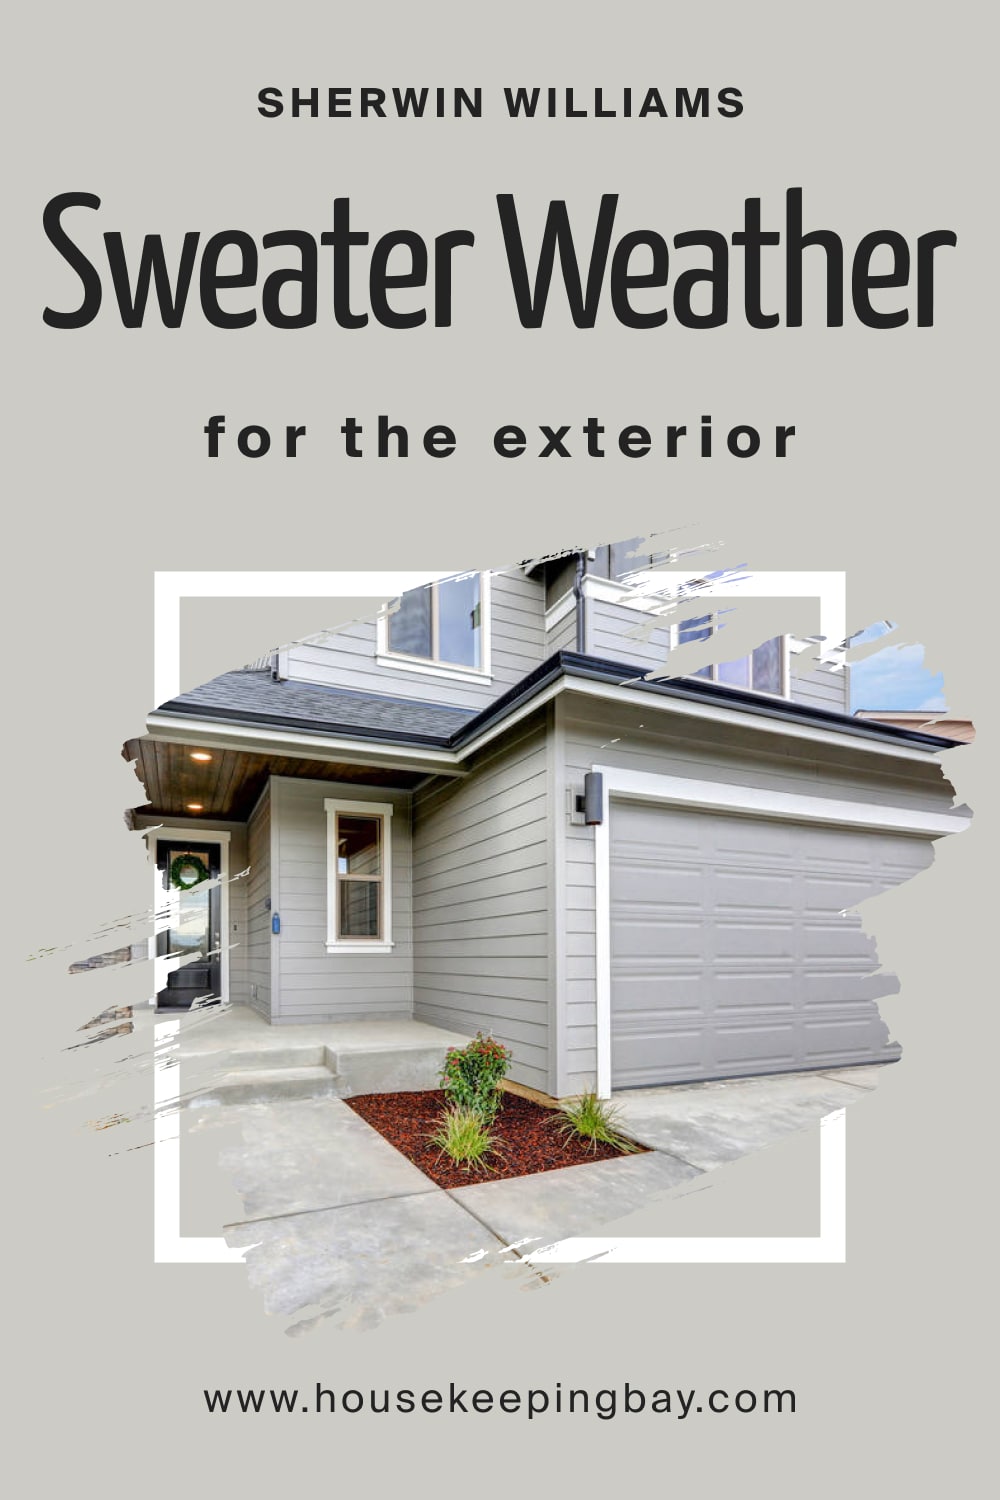 Sherwin Williams. Sweater Weather SW 9548 For the exterior